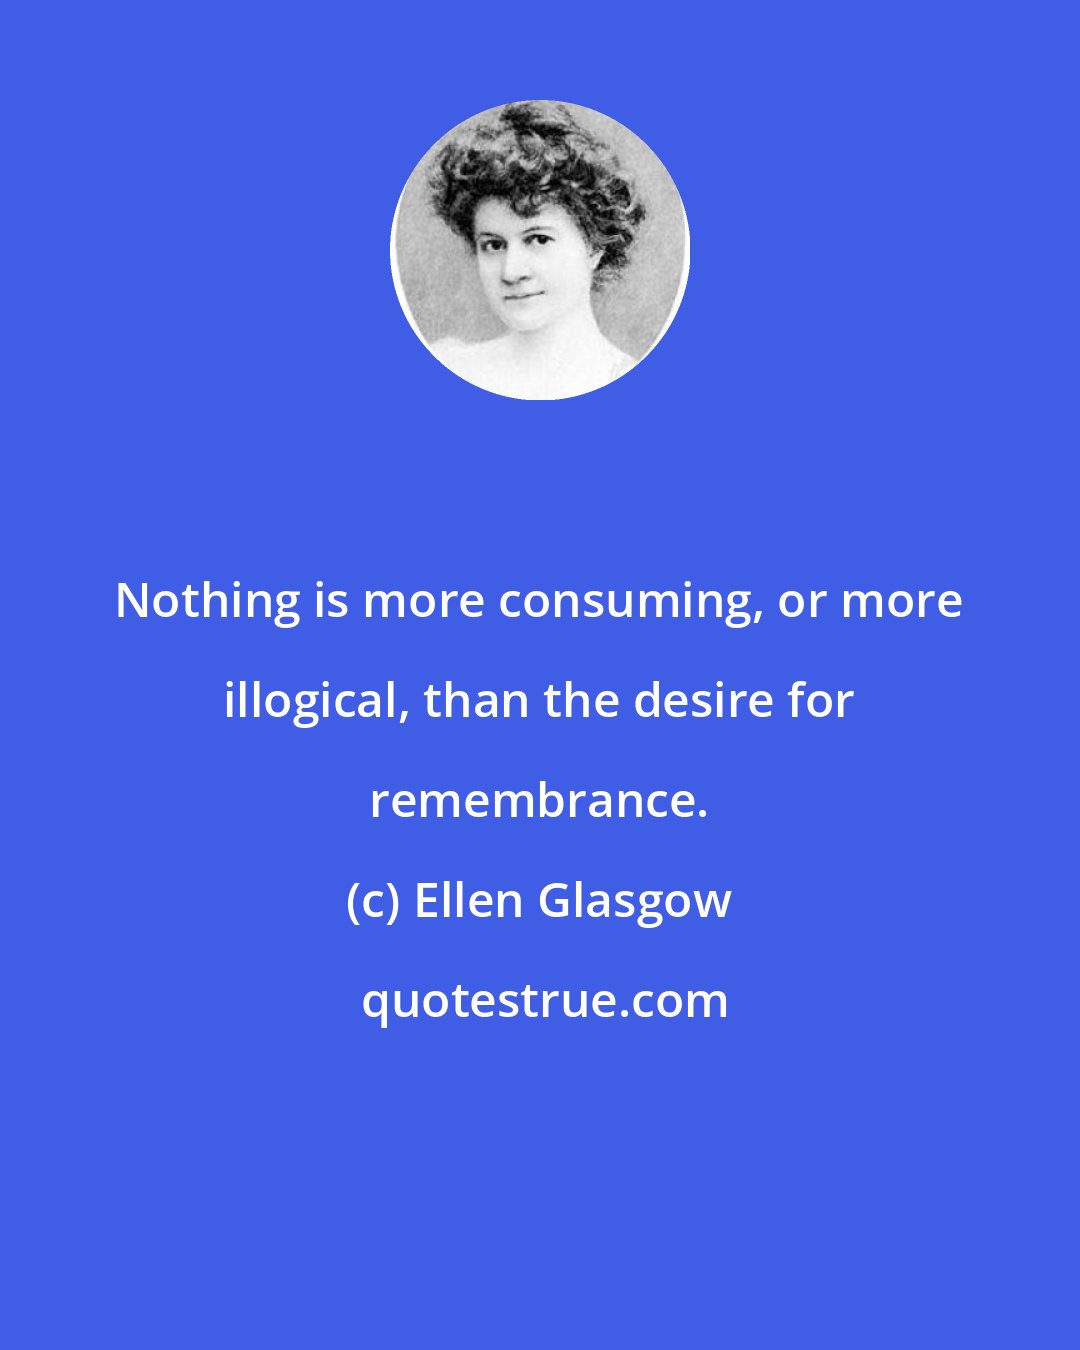 Ellen Glasgow: Nothing is more consuming, or more illogical, than the desire for remembrance.